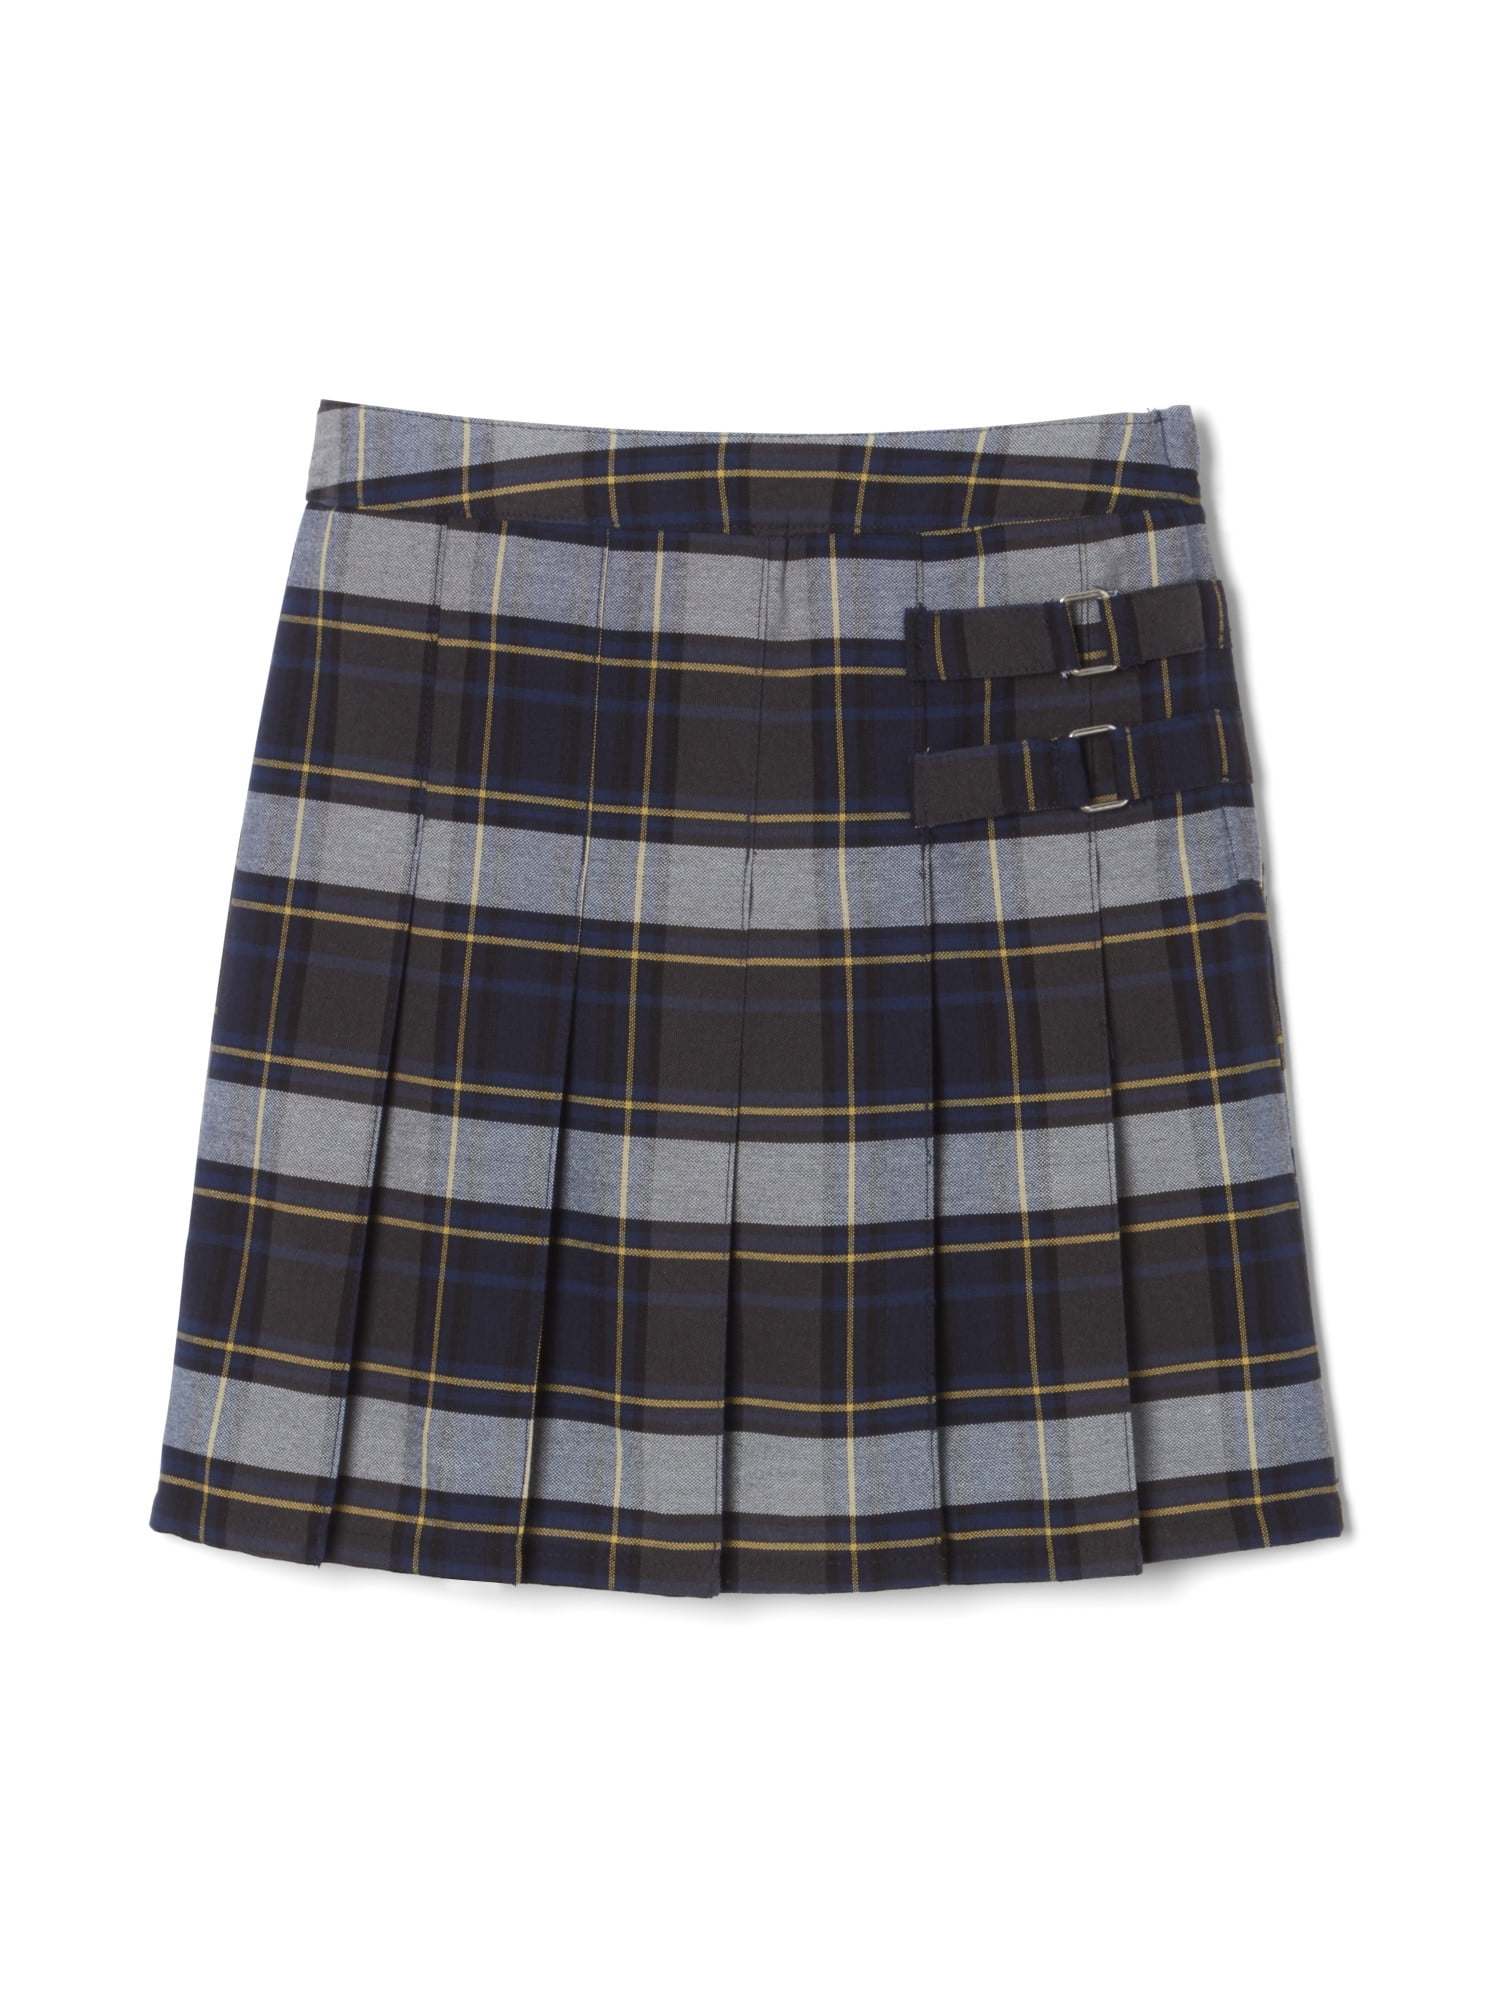 SIZE 20 NEW w/Tag @SCHOOL BY FRENCH TOAST SKORT/CULOTTE 